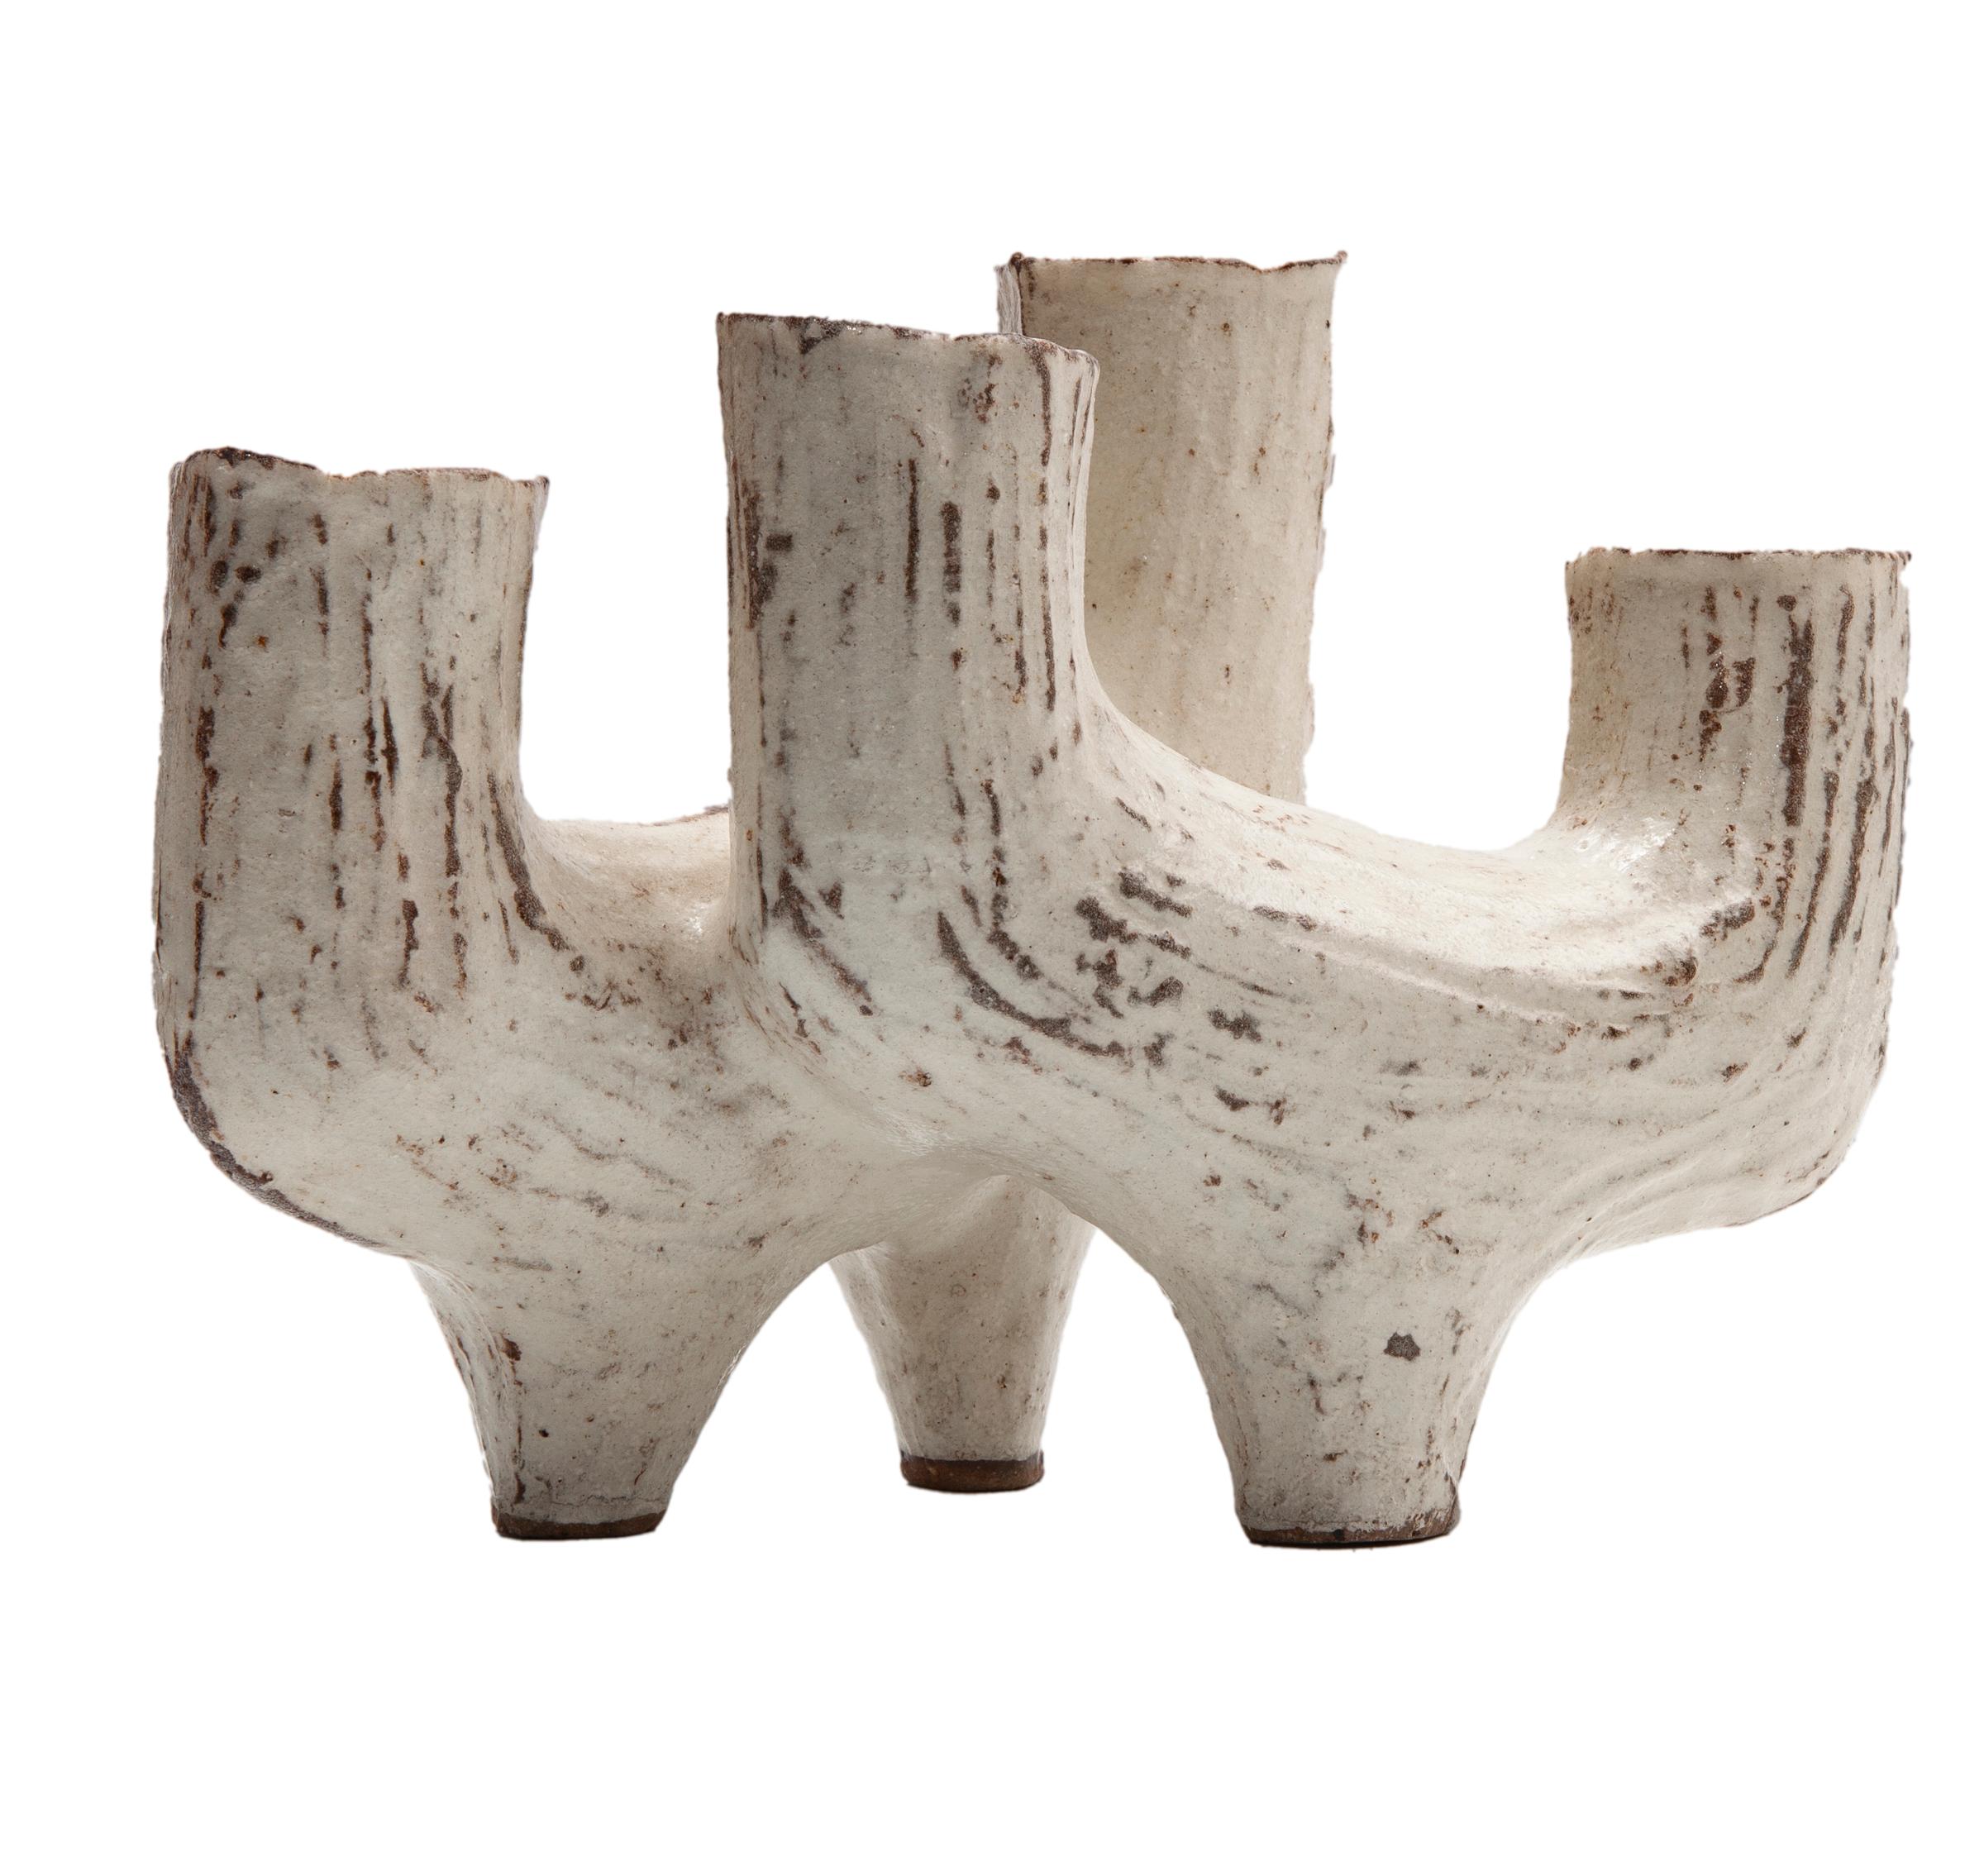 Organic Modern White Ceramic Asian Candle Holder For Sale